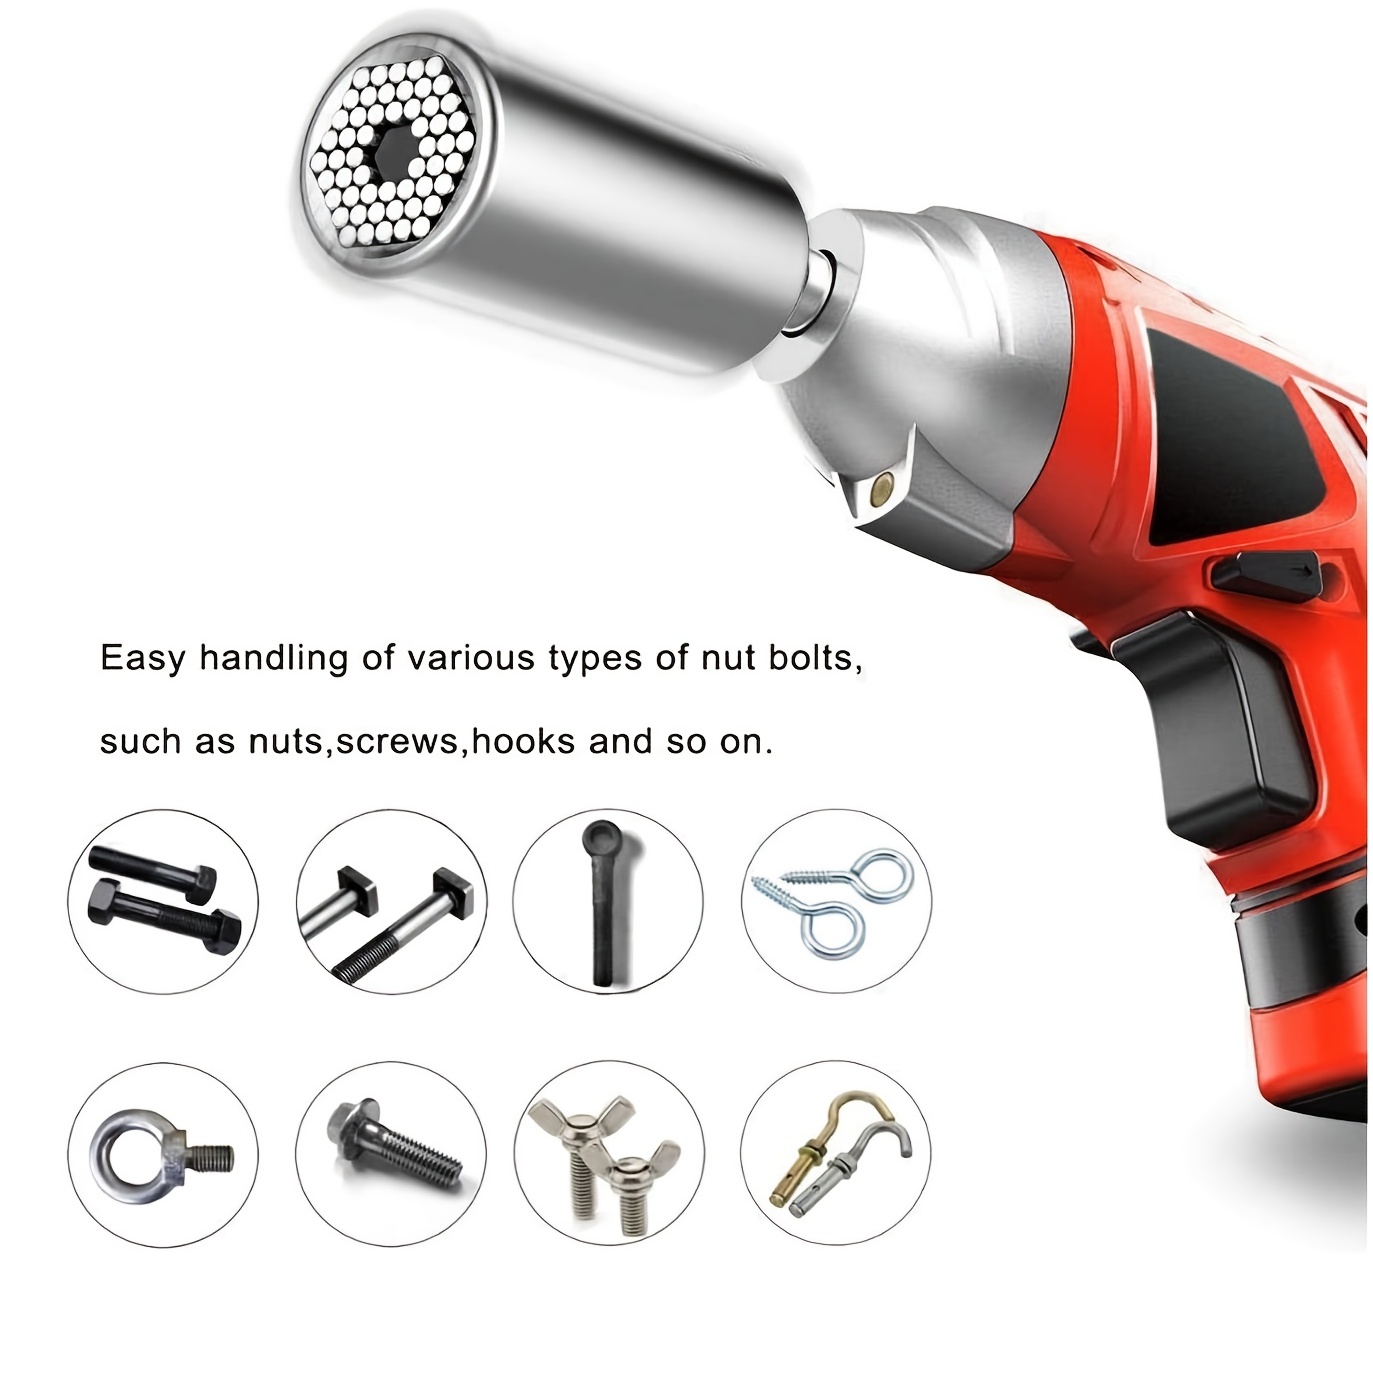 Stocking Stuffers Super Universal Socket - Tools Gifts for Men Women Grip  Socket with Power Drill Adapter Cool Gadgets for Men Car Guy Birthday Gift